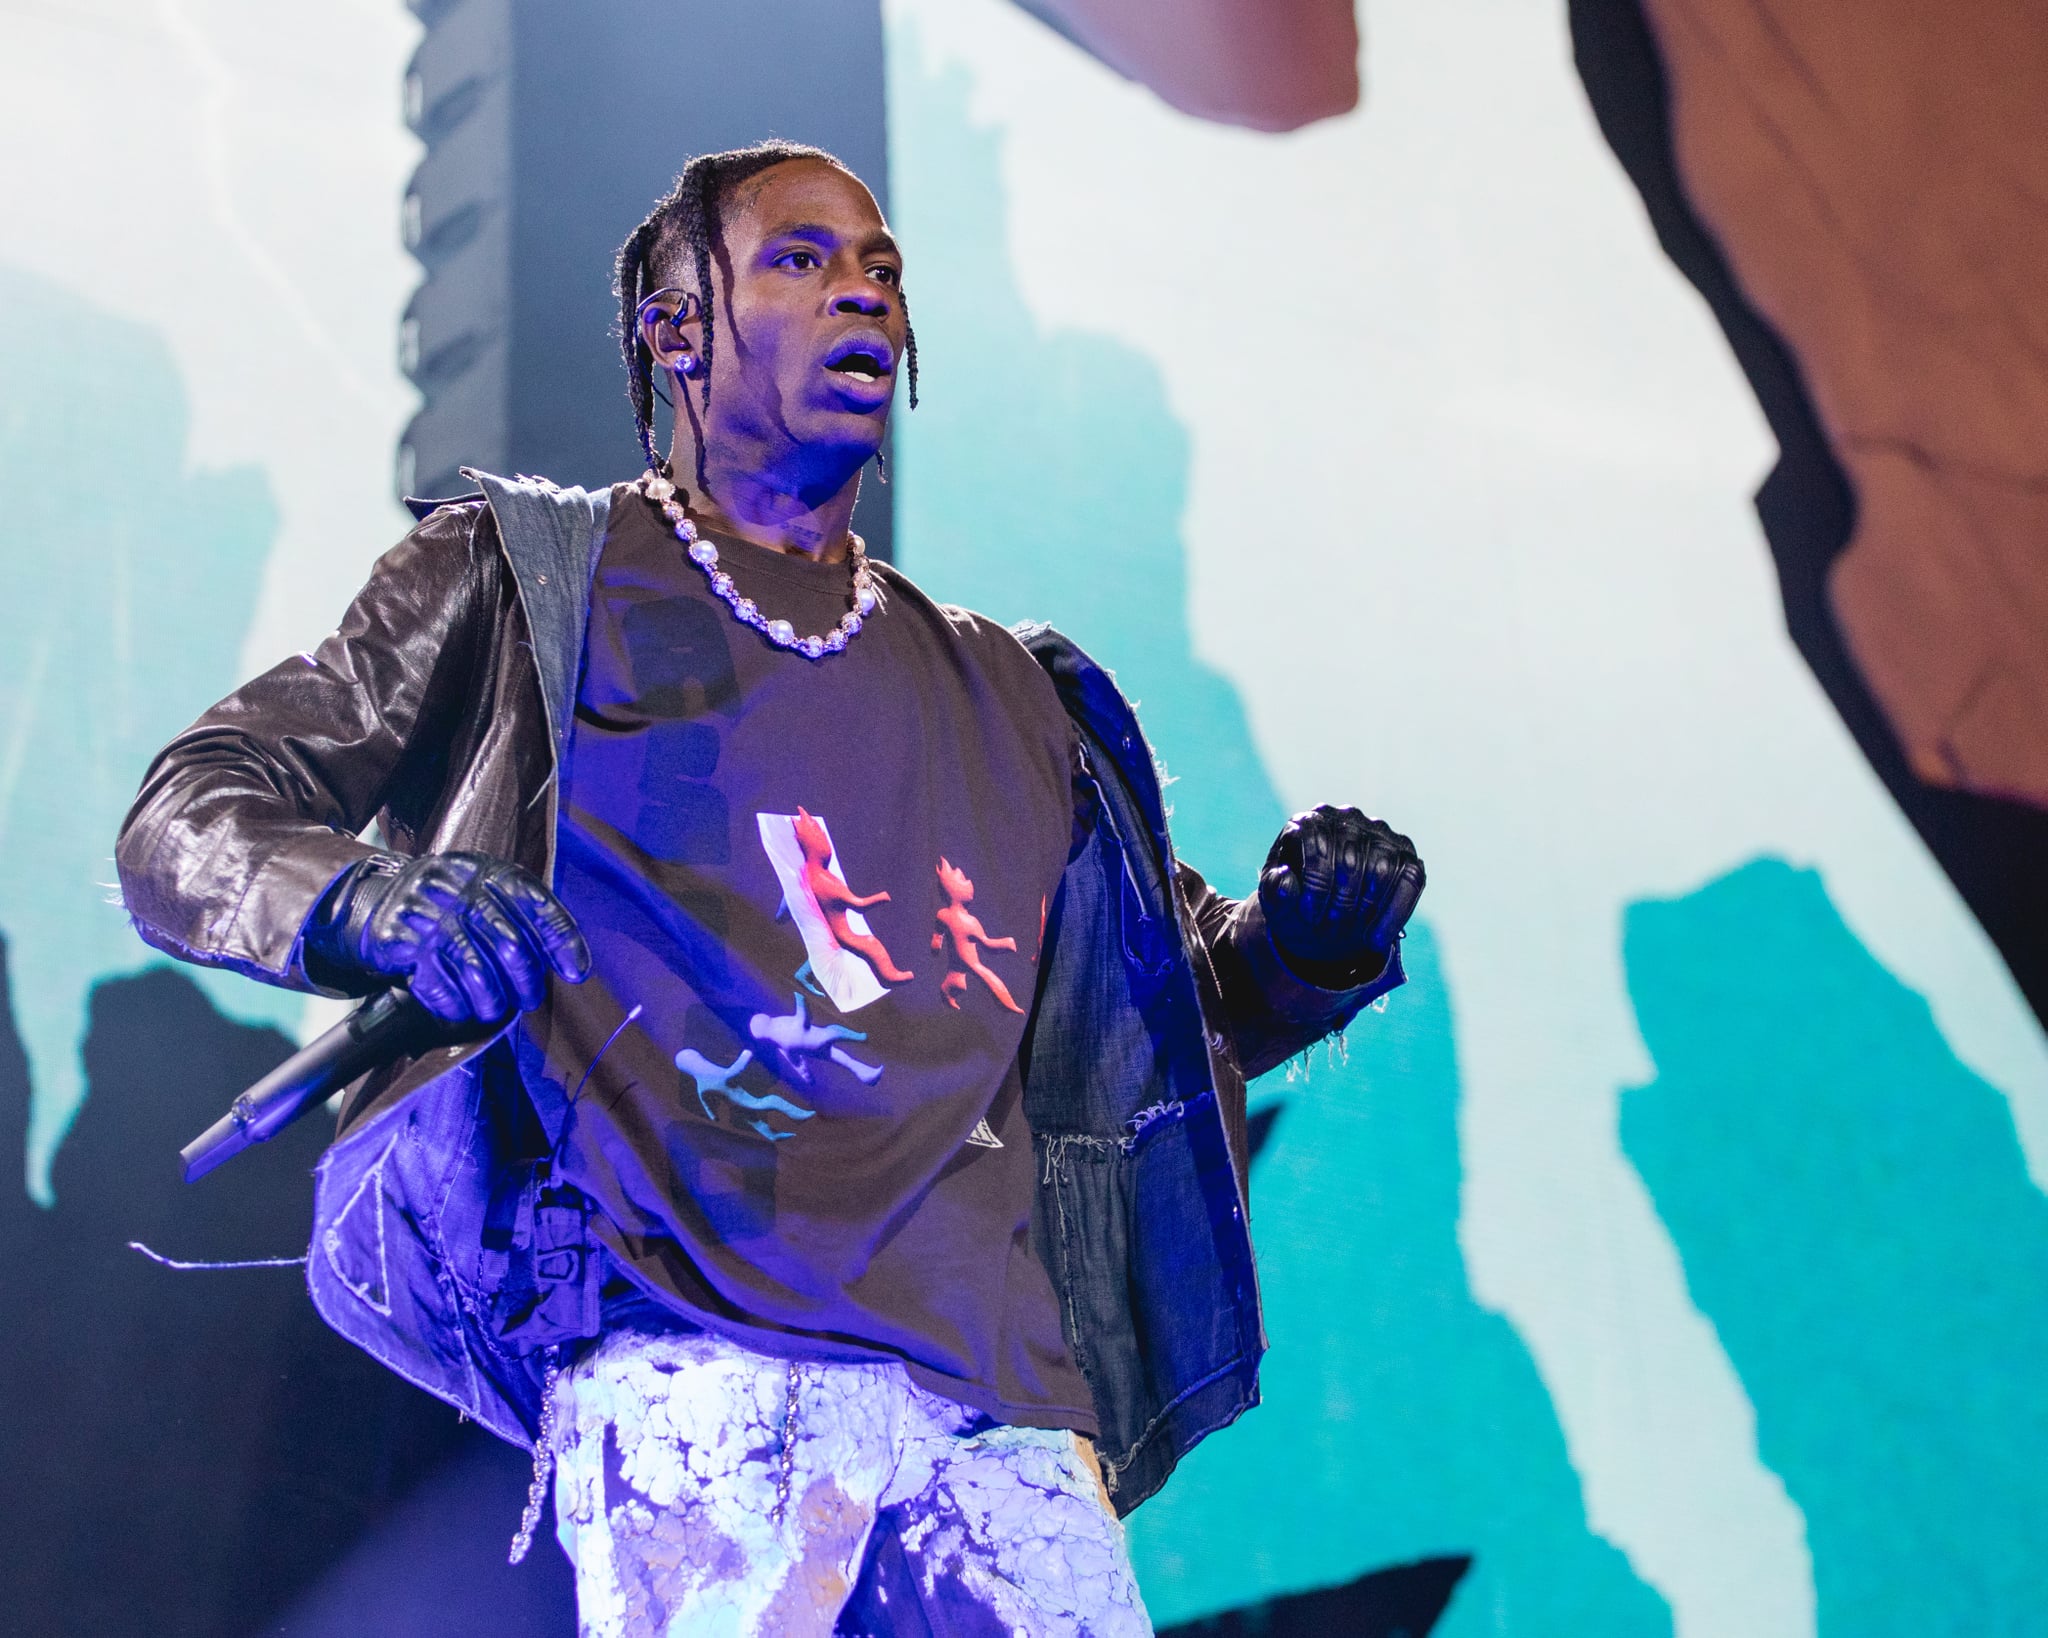 HOUSTON, TEXAS - NOVEMBER 05: Travis Scott performs onstage during the third annual Astroworld Festival at NRG Park on November 05, 2021 in Houston, Texas. (Photo by Rick Kern/Getty Images)